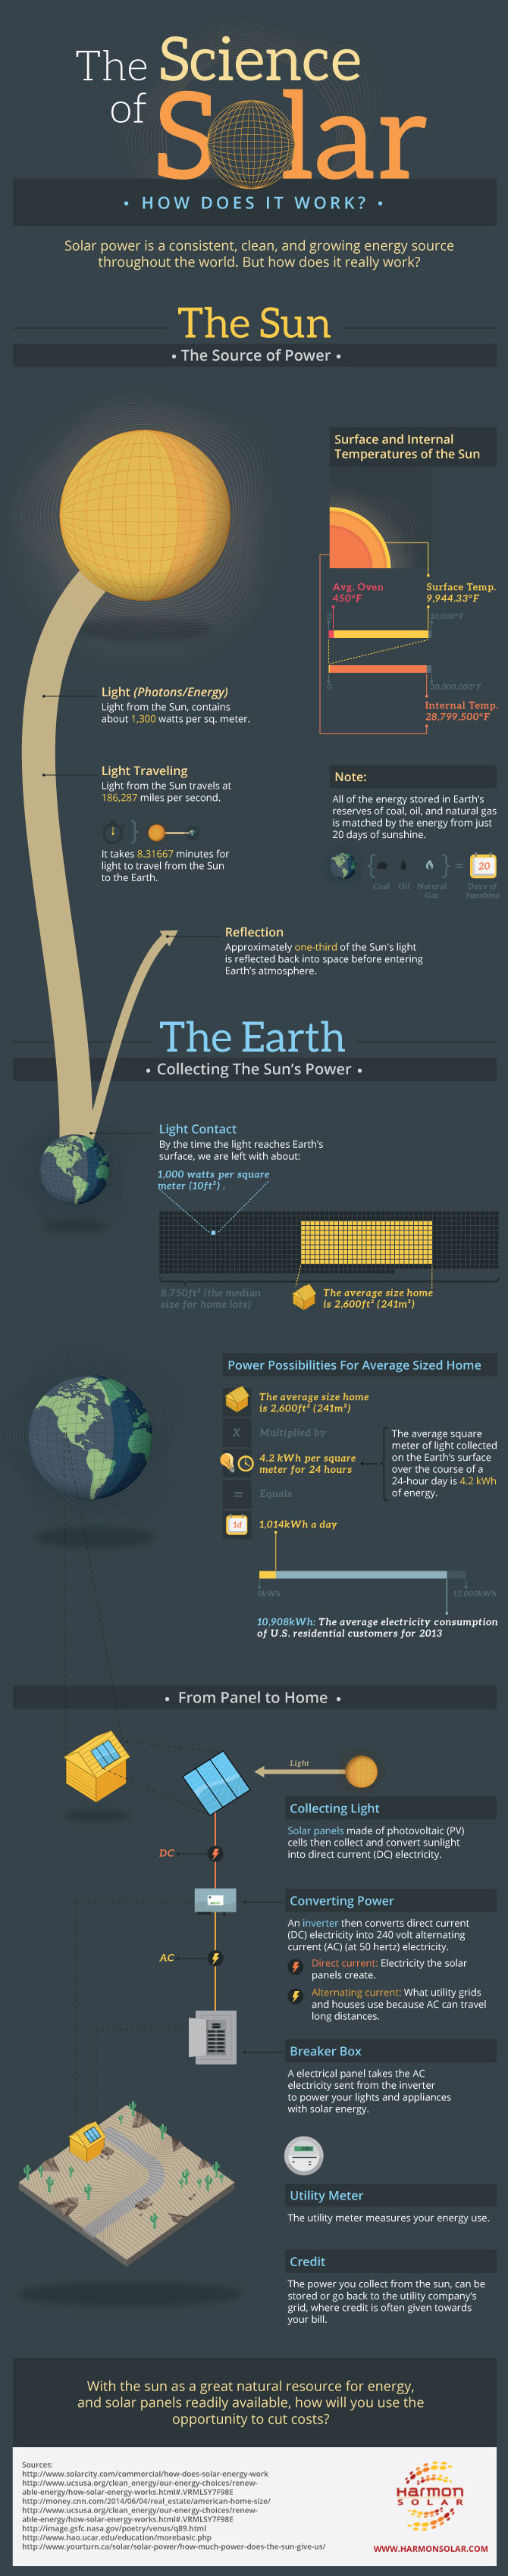 The-Science-Of-Solar